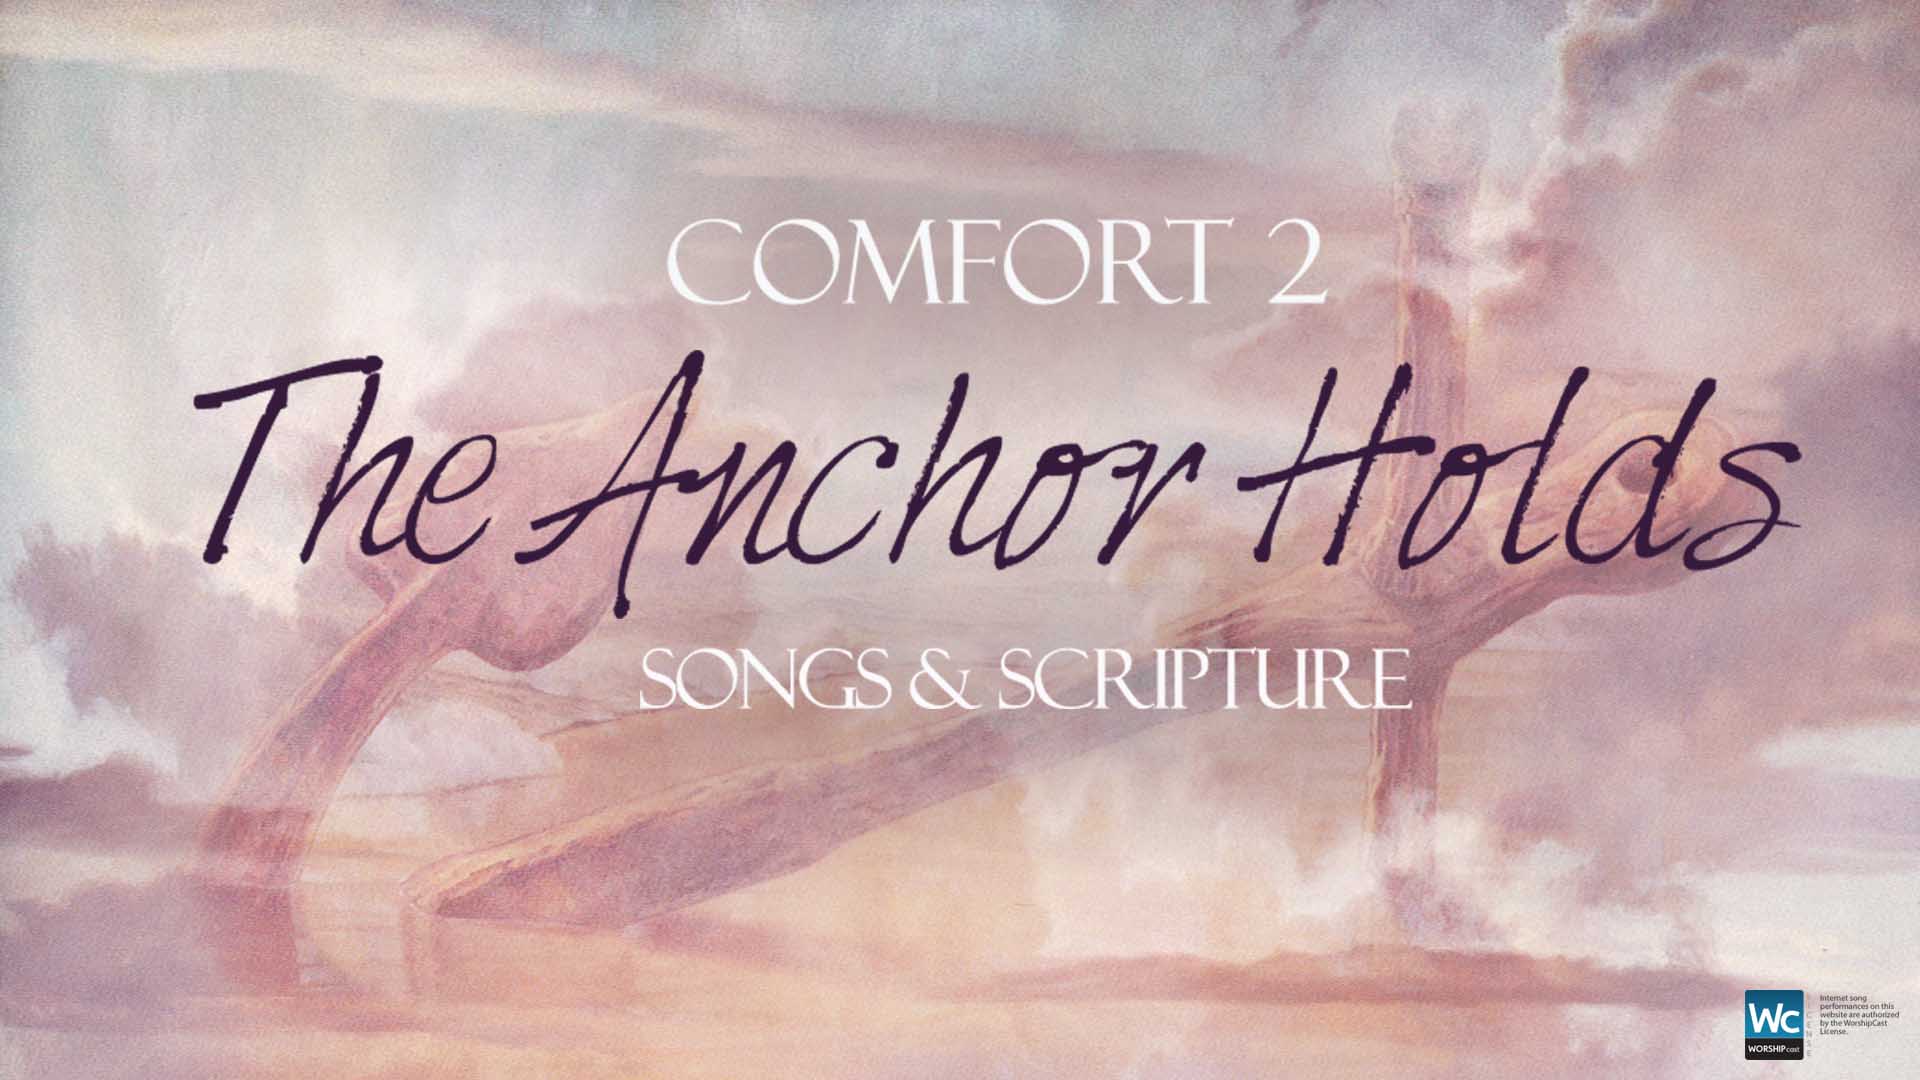 Comfort 2: The Anchor Holds